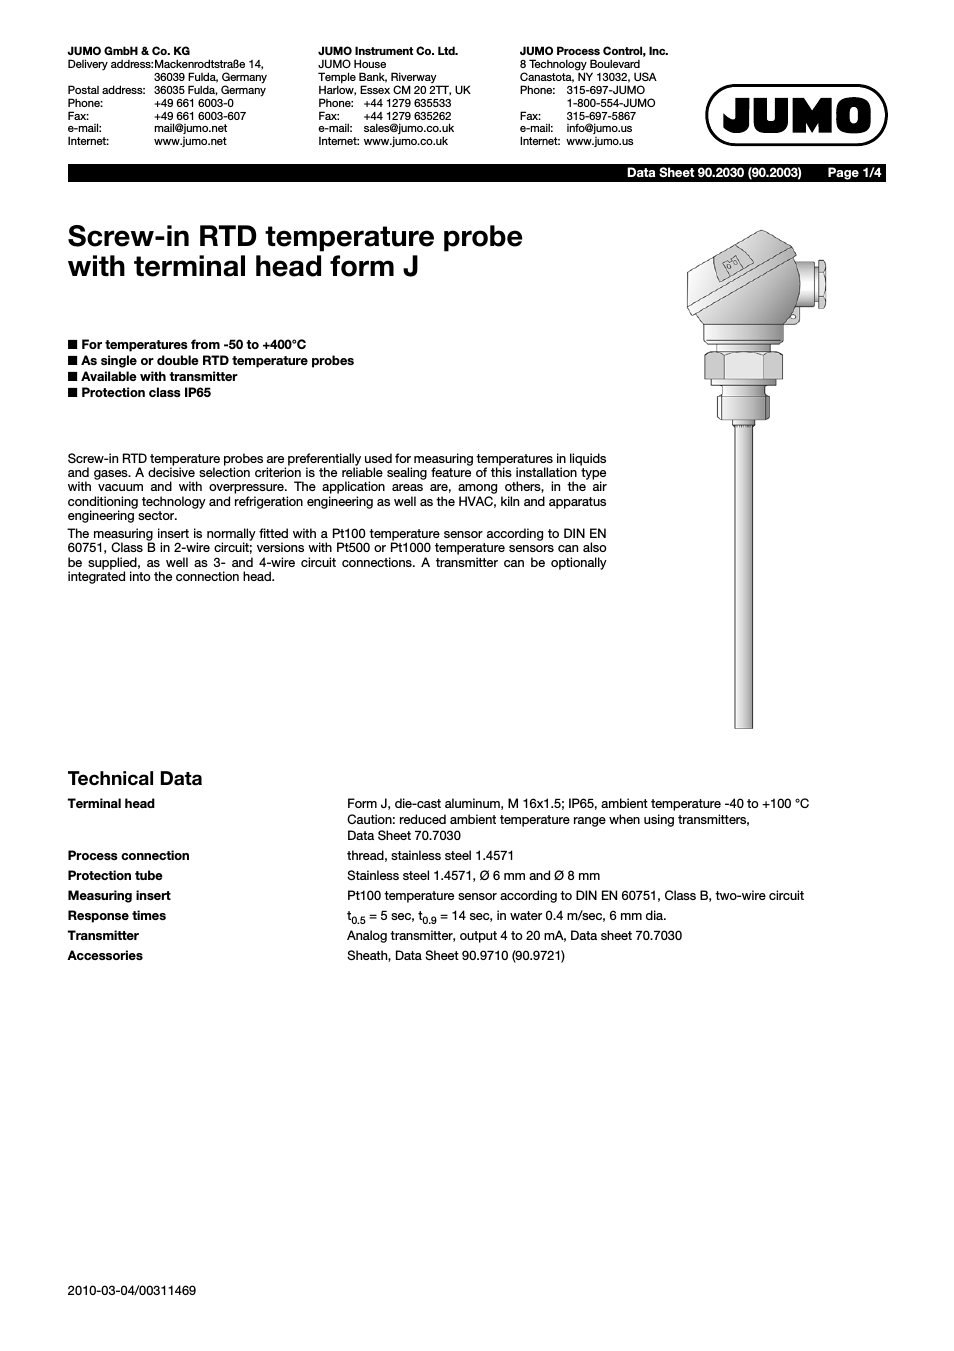 902030 Screw-in RTD Temperature Probe with Form J Terminal Head Data Sheet